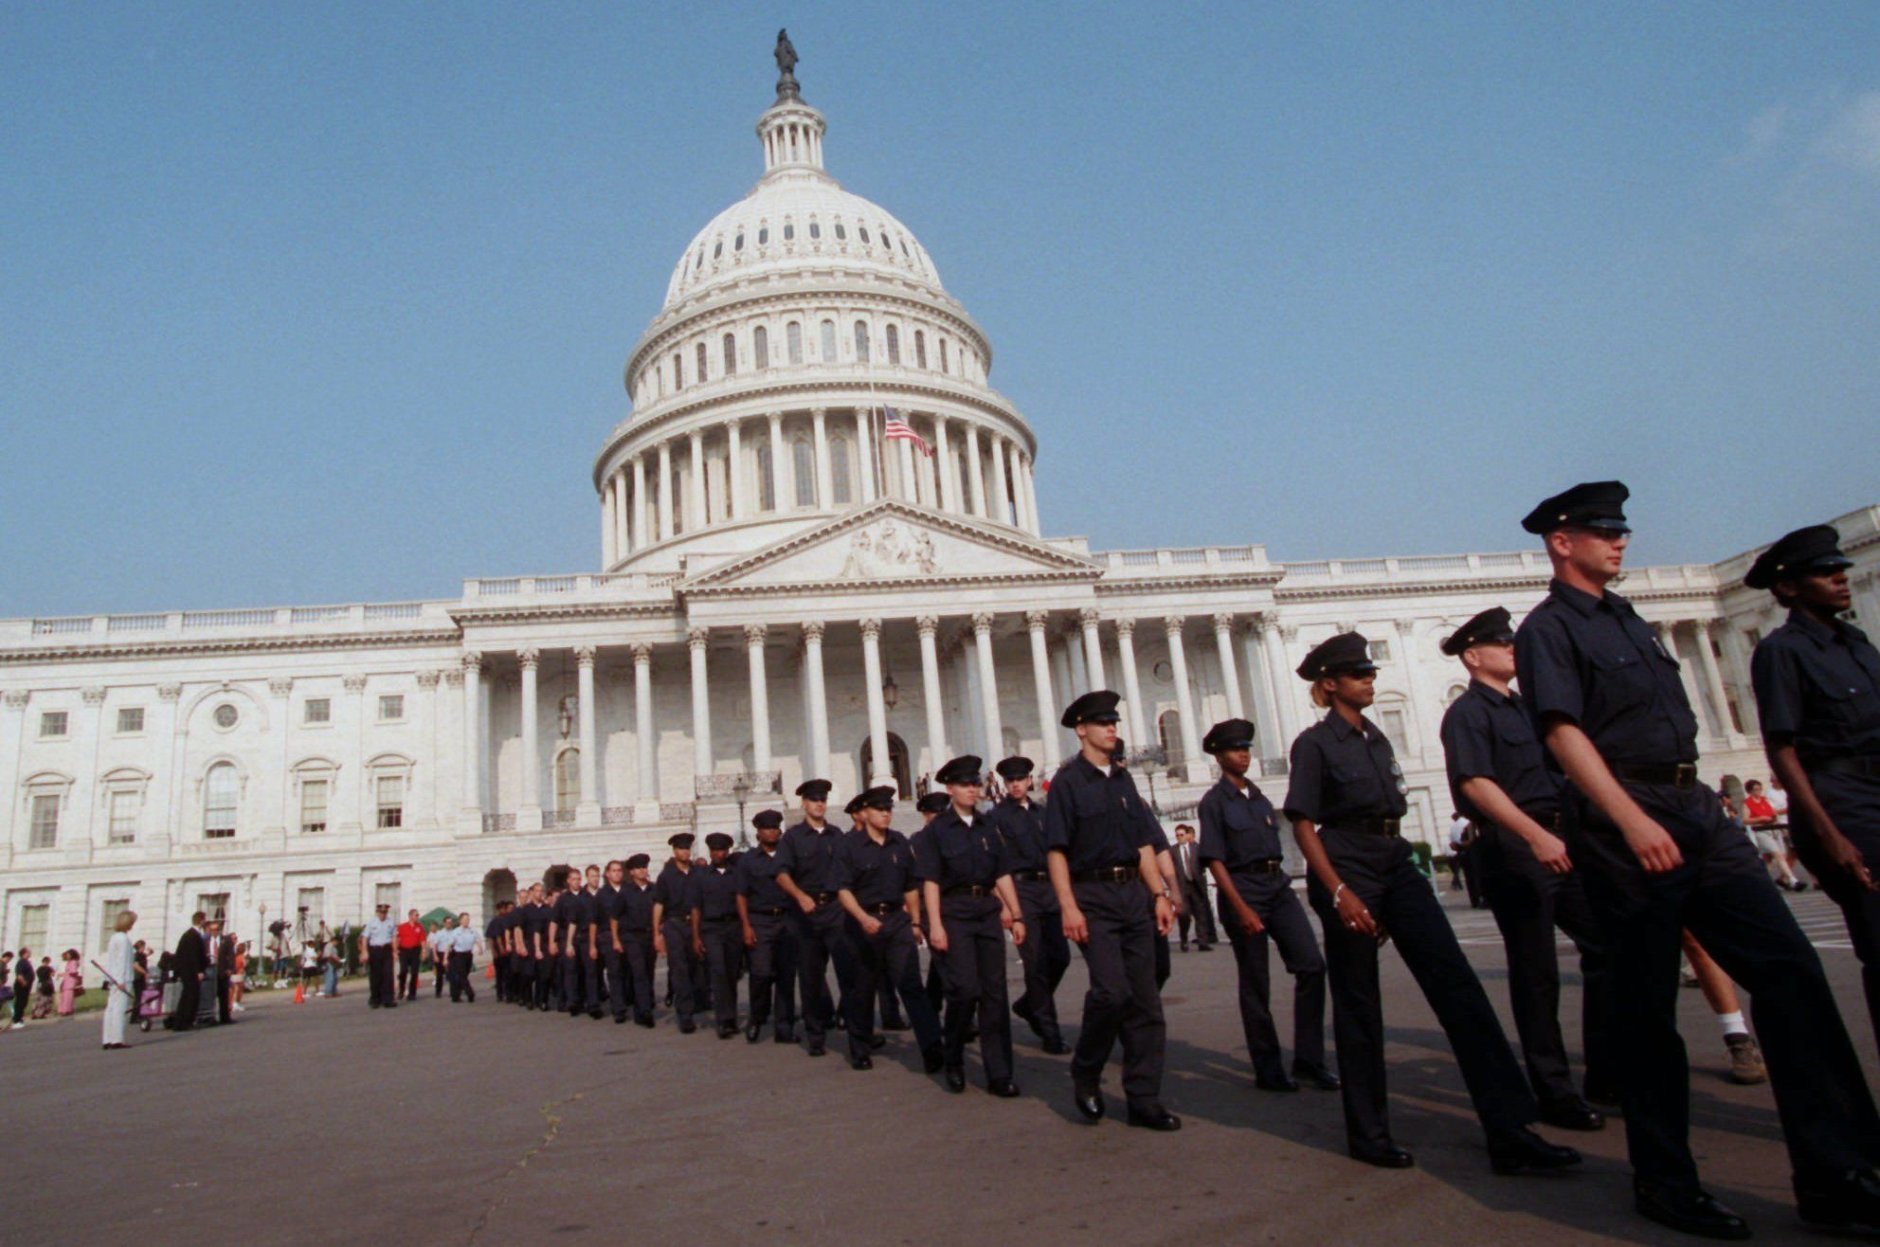 Capitol police officers march on Capitol Hill Tuesday, July 28, 1998 prior to a memorial service honoring two slain Capitol police officers. In exceptional homage, members of the public filed noiselessly into the stately Rotunda and around the flag-draped caskets of the two officers who were slain defending the building Friday. (AP Photo/Khue Bui)